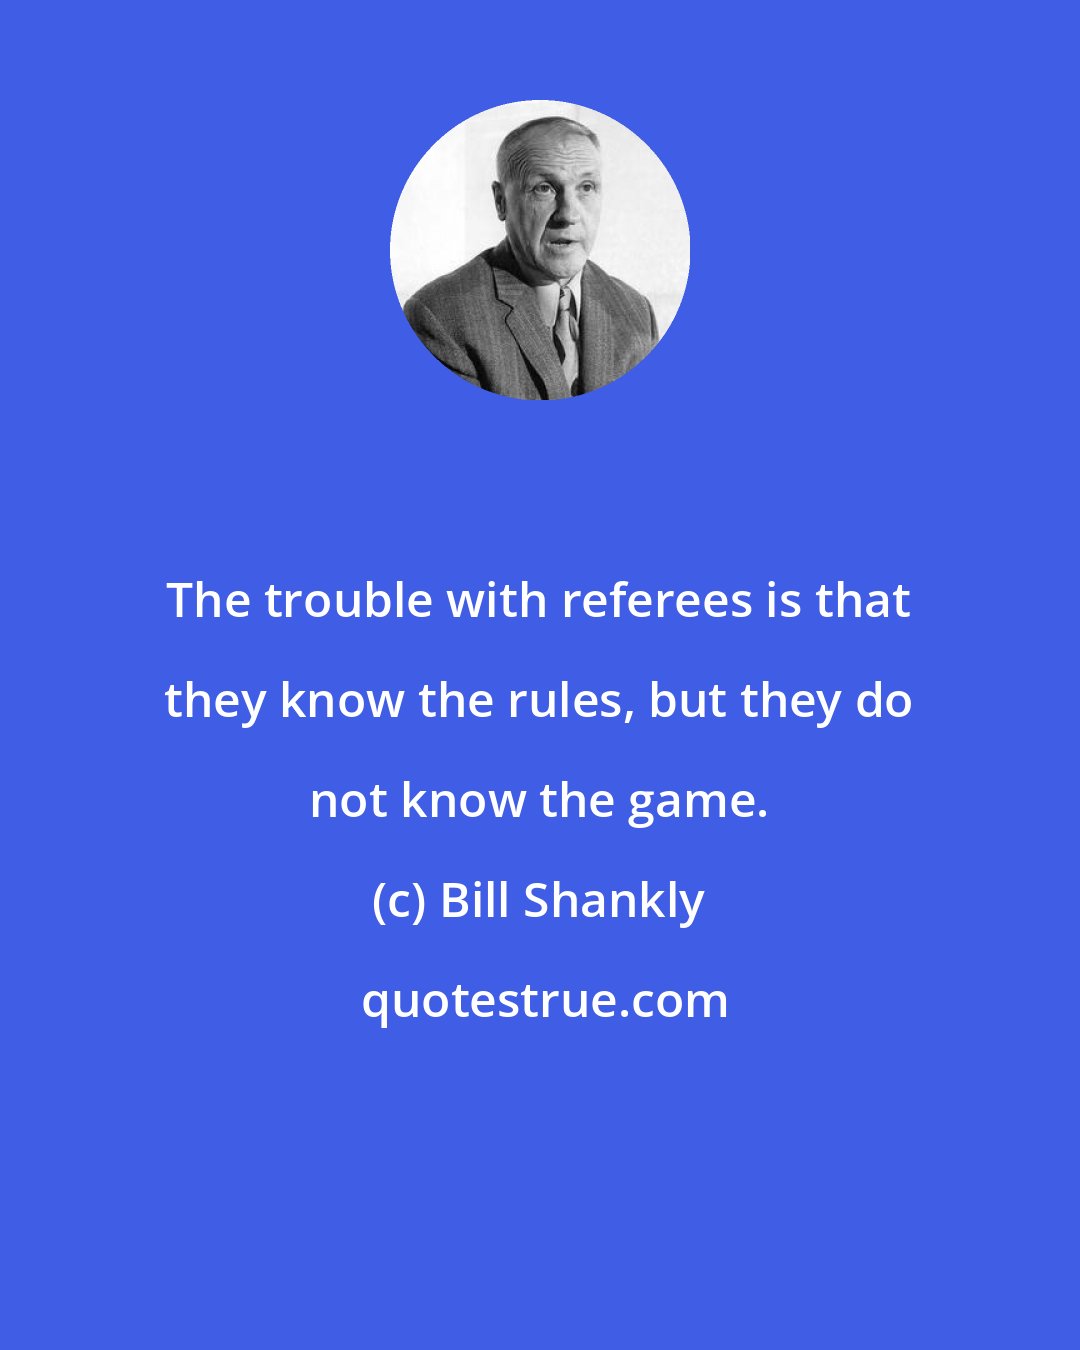 Bill Shankly: The trouble with referees is that they know the rules, but they do not know the game.